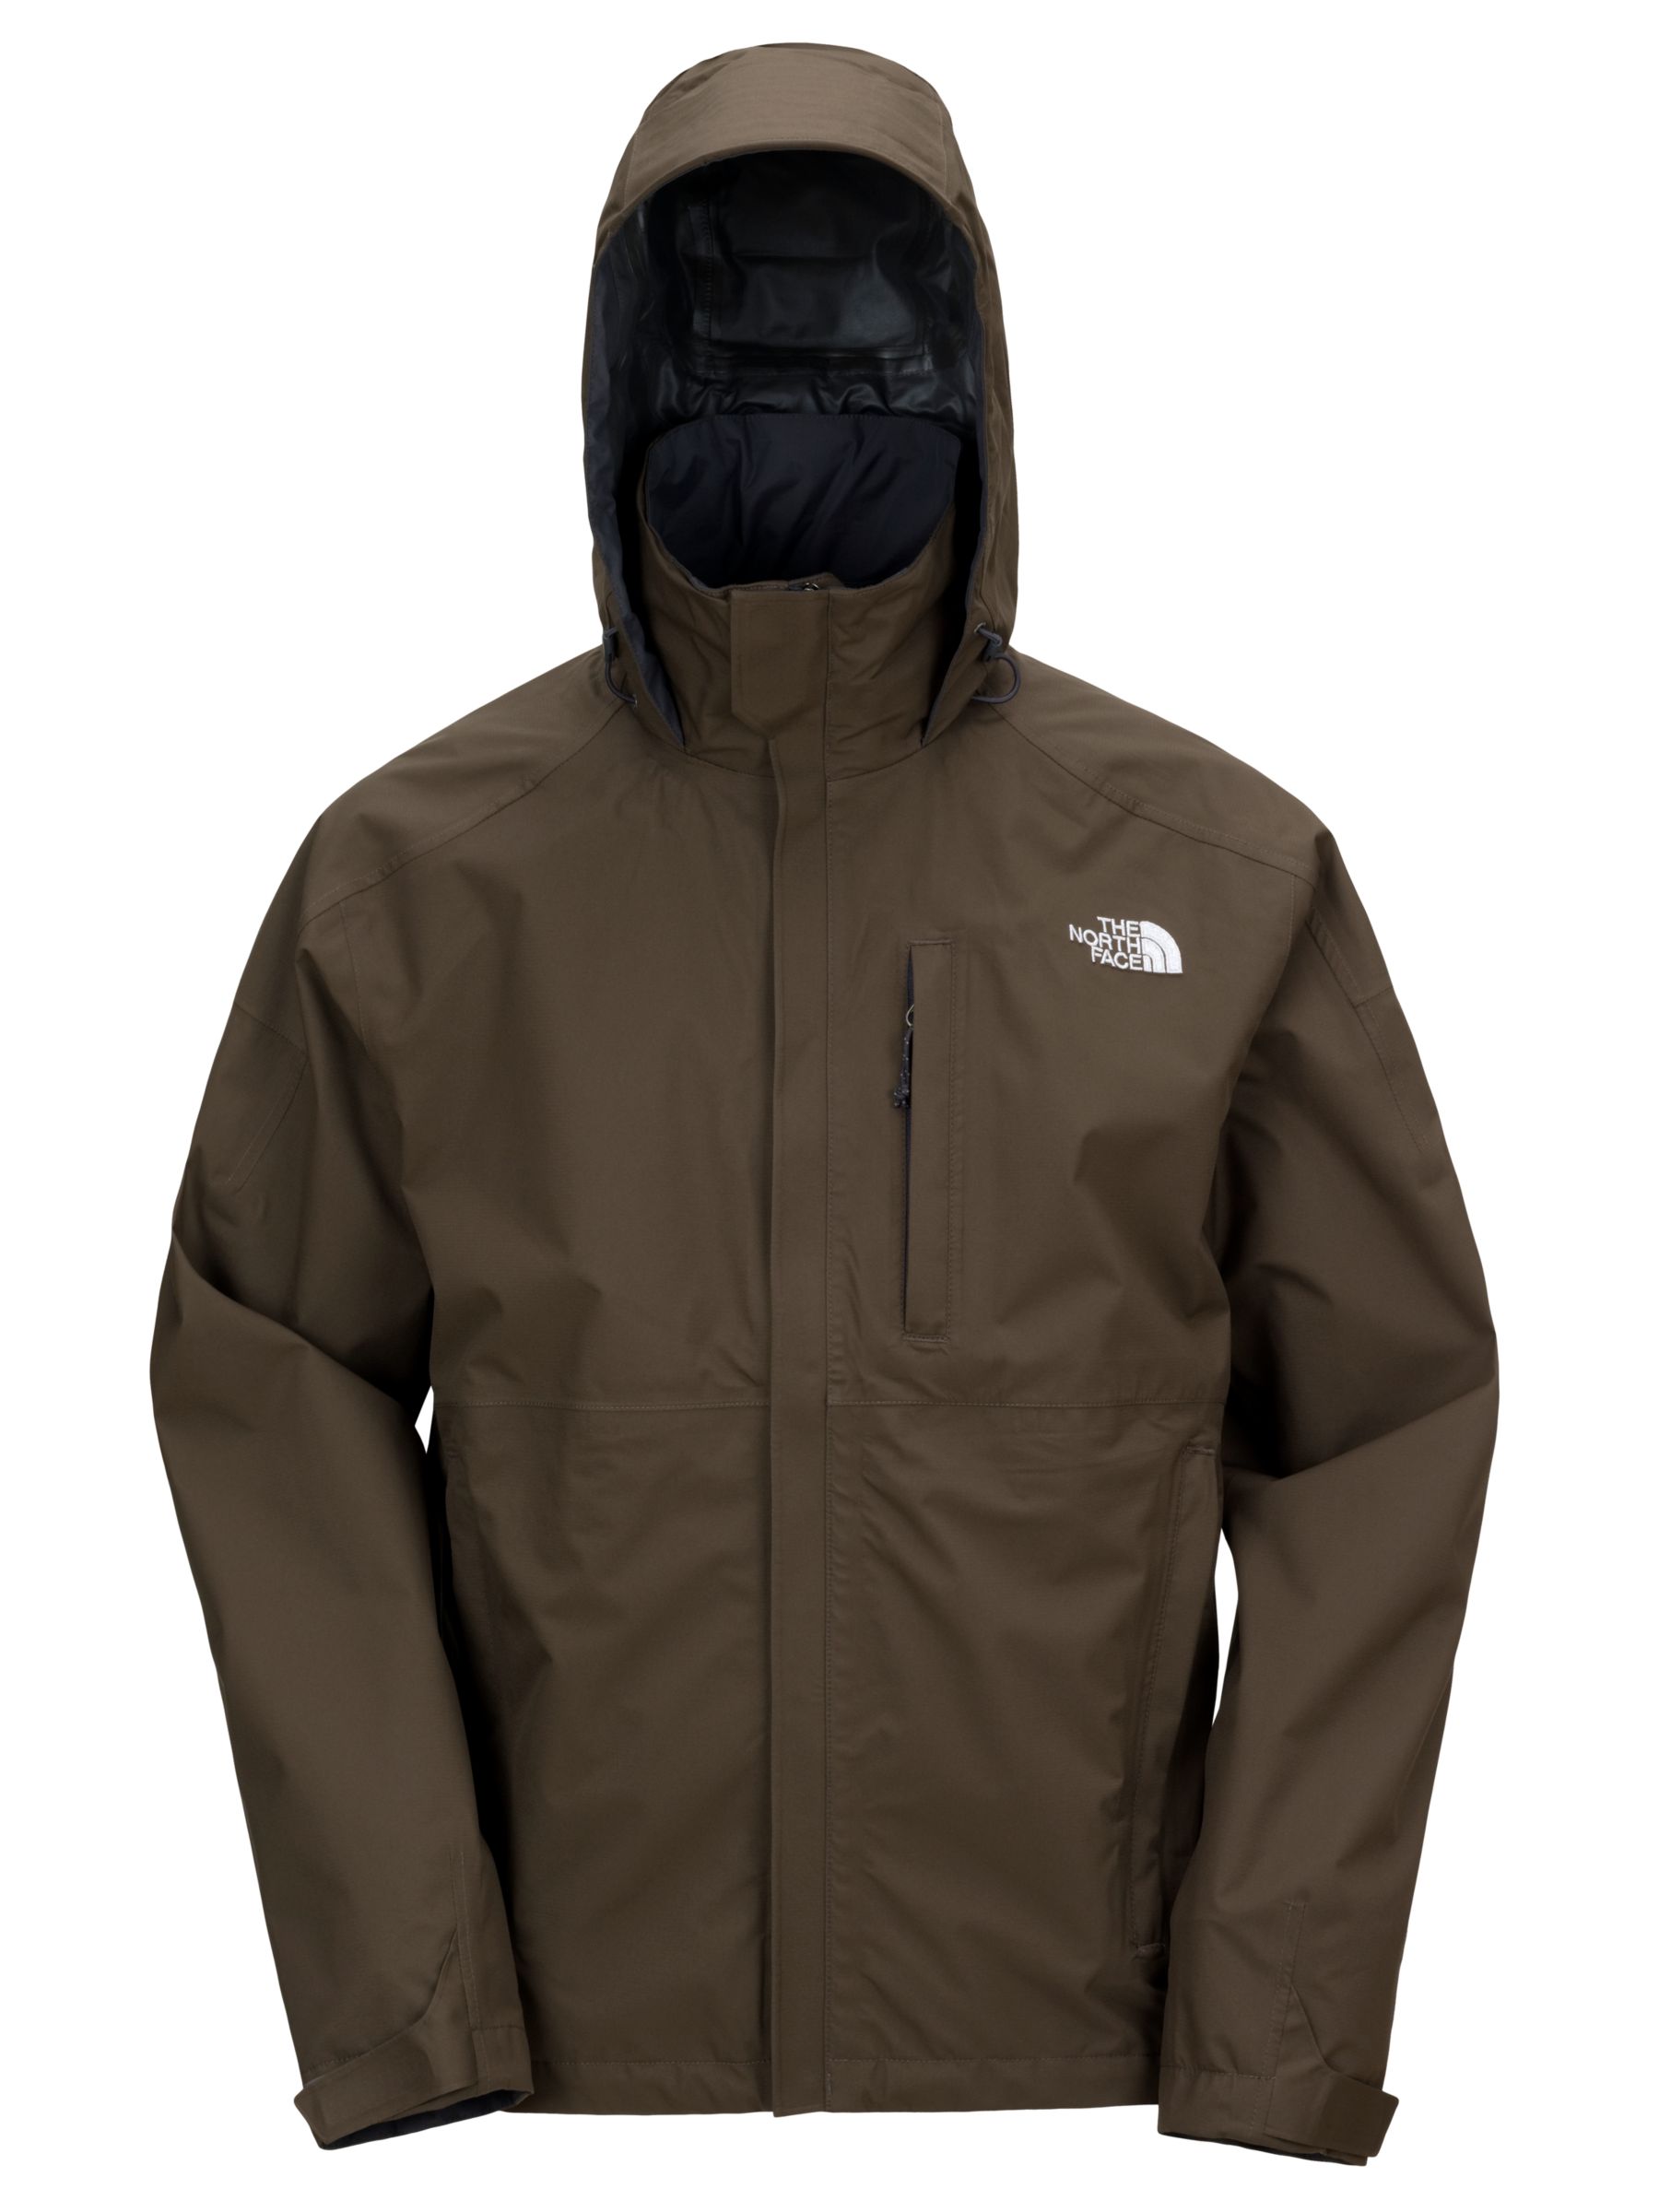 The North Face Circadian Gore-Tex Paclite Jacket, Taupe green at JohnLewis